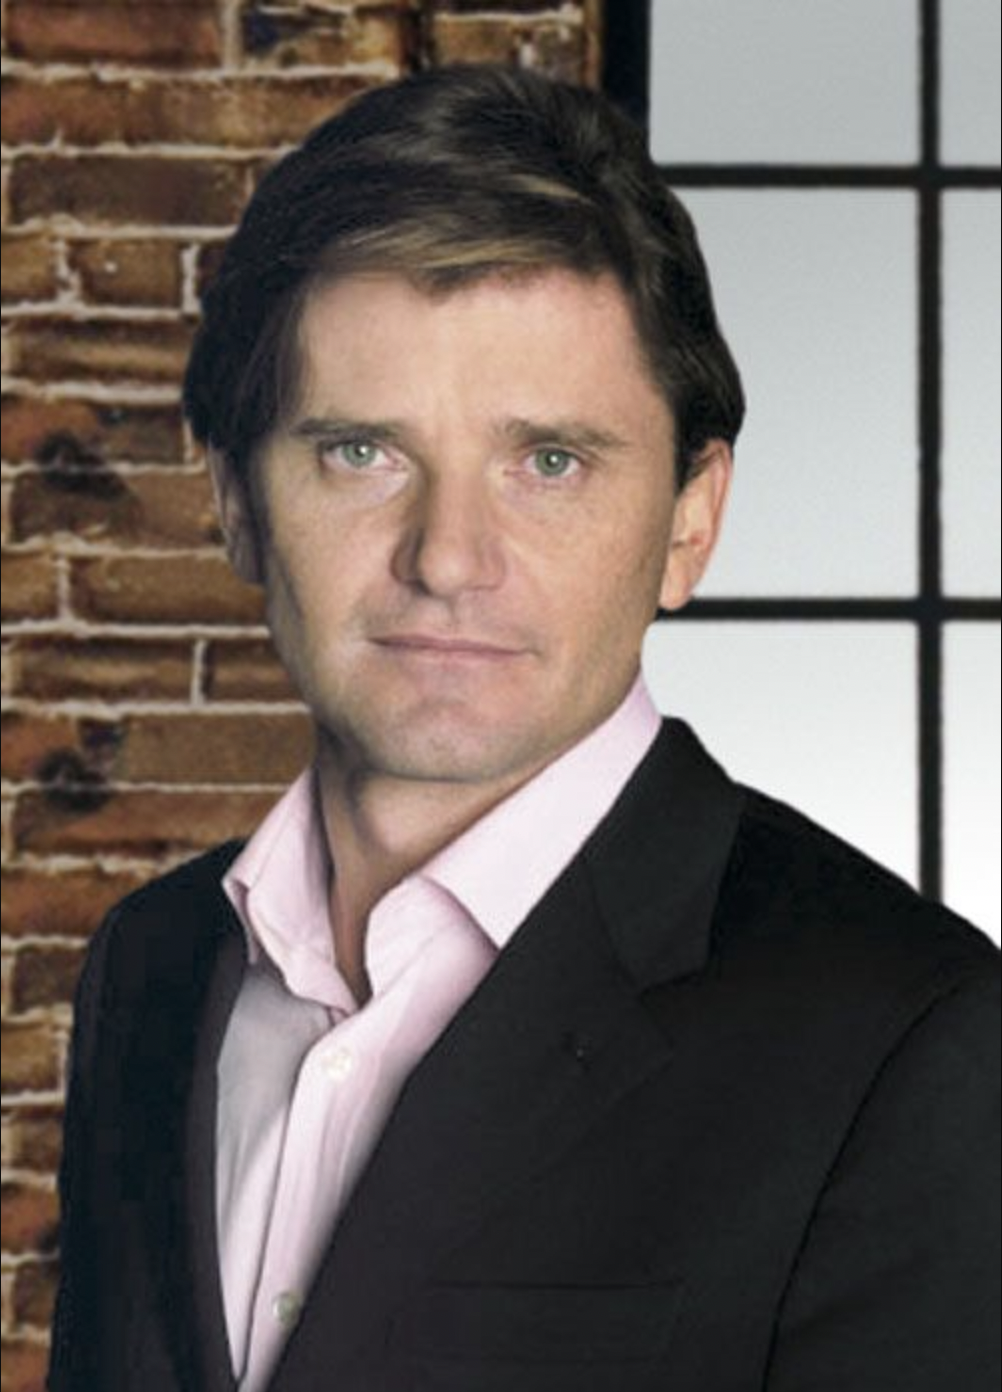 Headshot of a brown-haired man wearing a black suit jacket and white collared shirt against a brick wall with a window